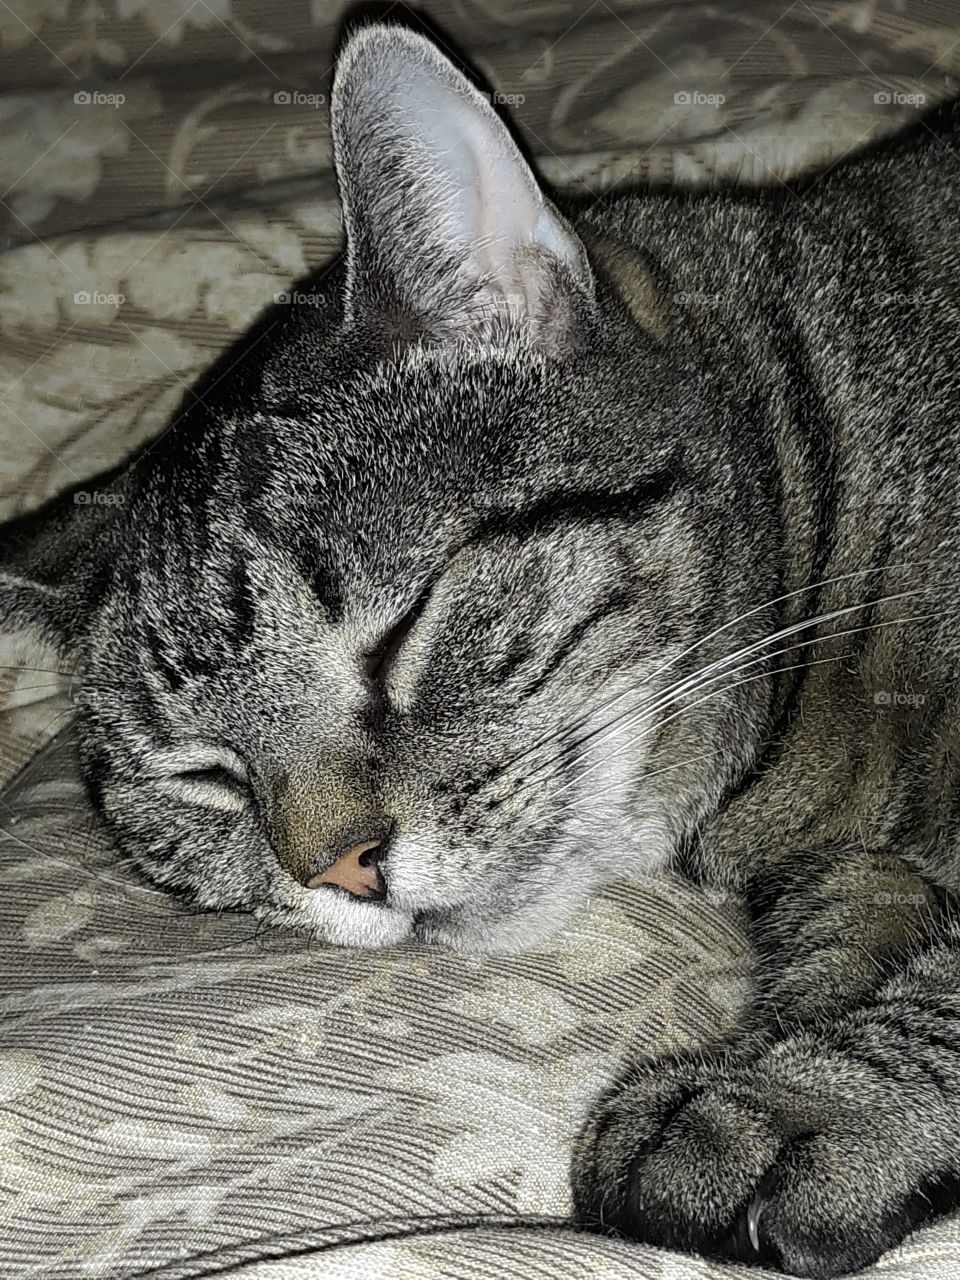 Here is Trooper, our beautiful dark sable Tabby cat. She is smiling in her sleep!